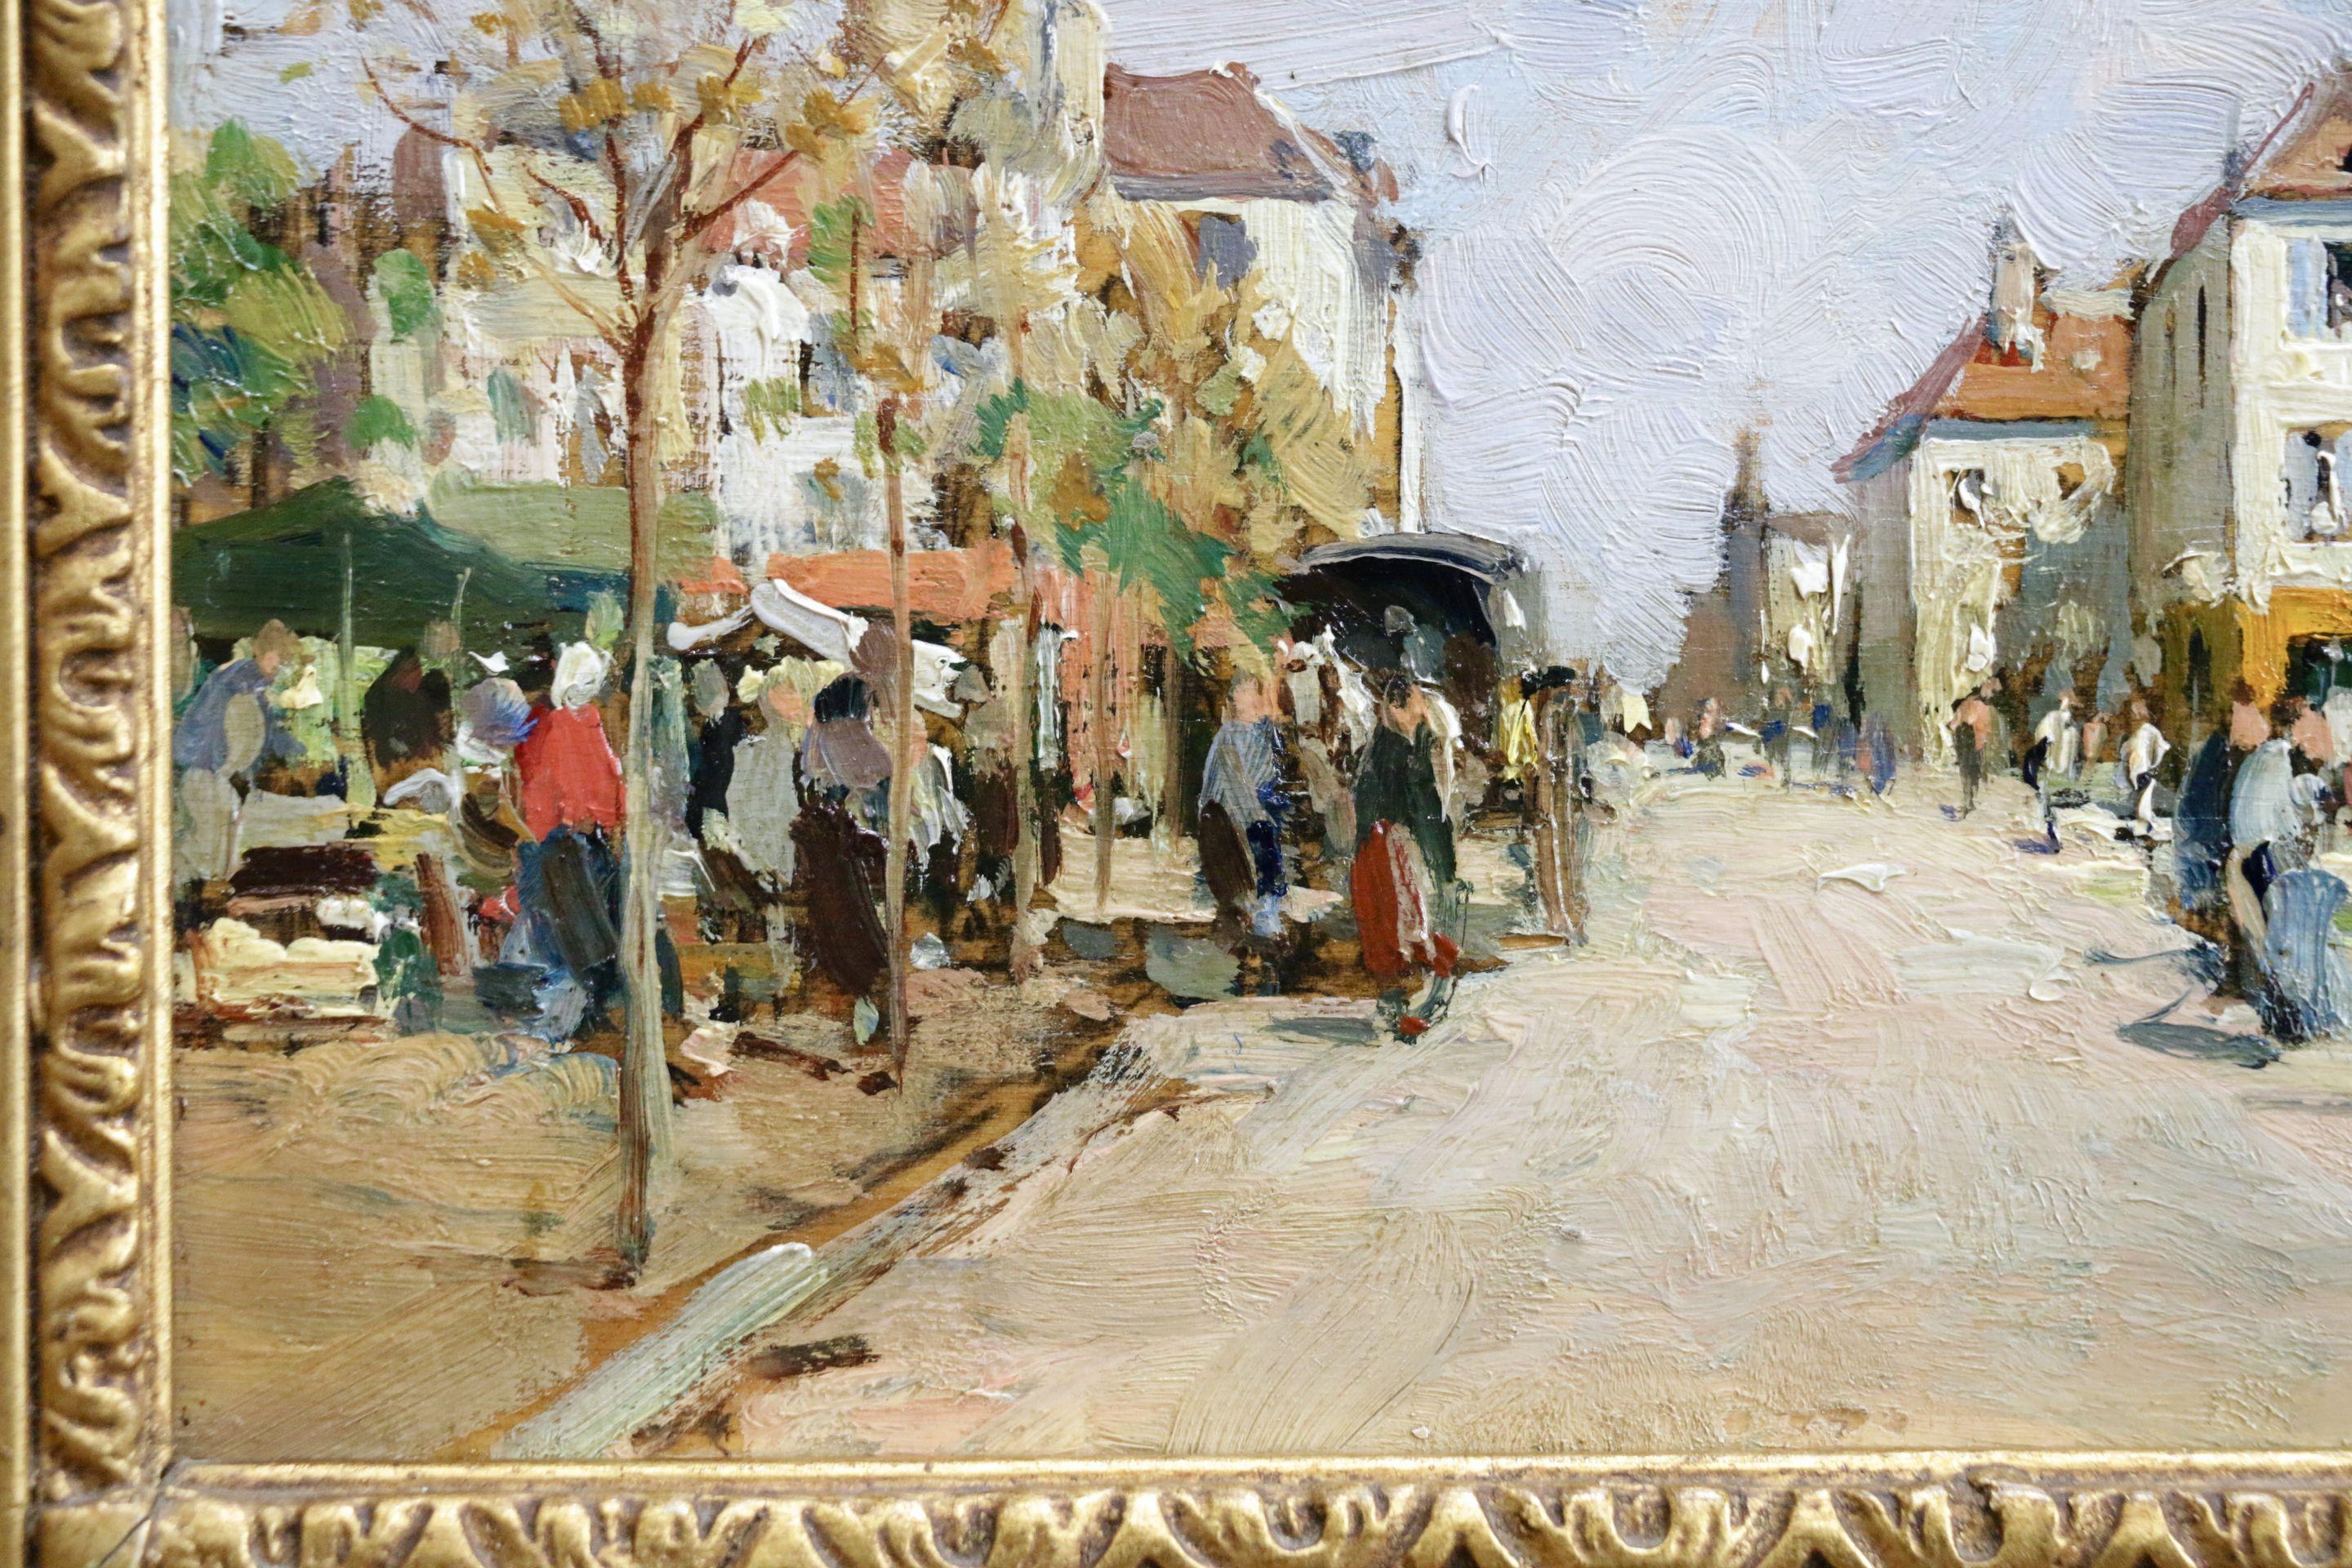 Market Day - 19th Century Oil, Figures in Street Scene Landscape by Paul Lecomte - Impressionist Painting by Paul Emile Lecomte